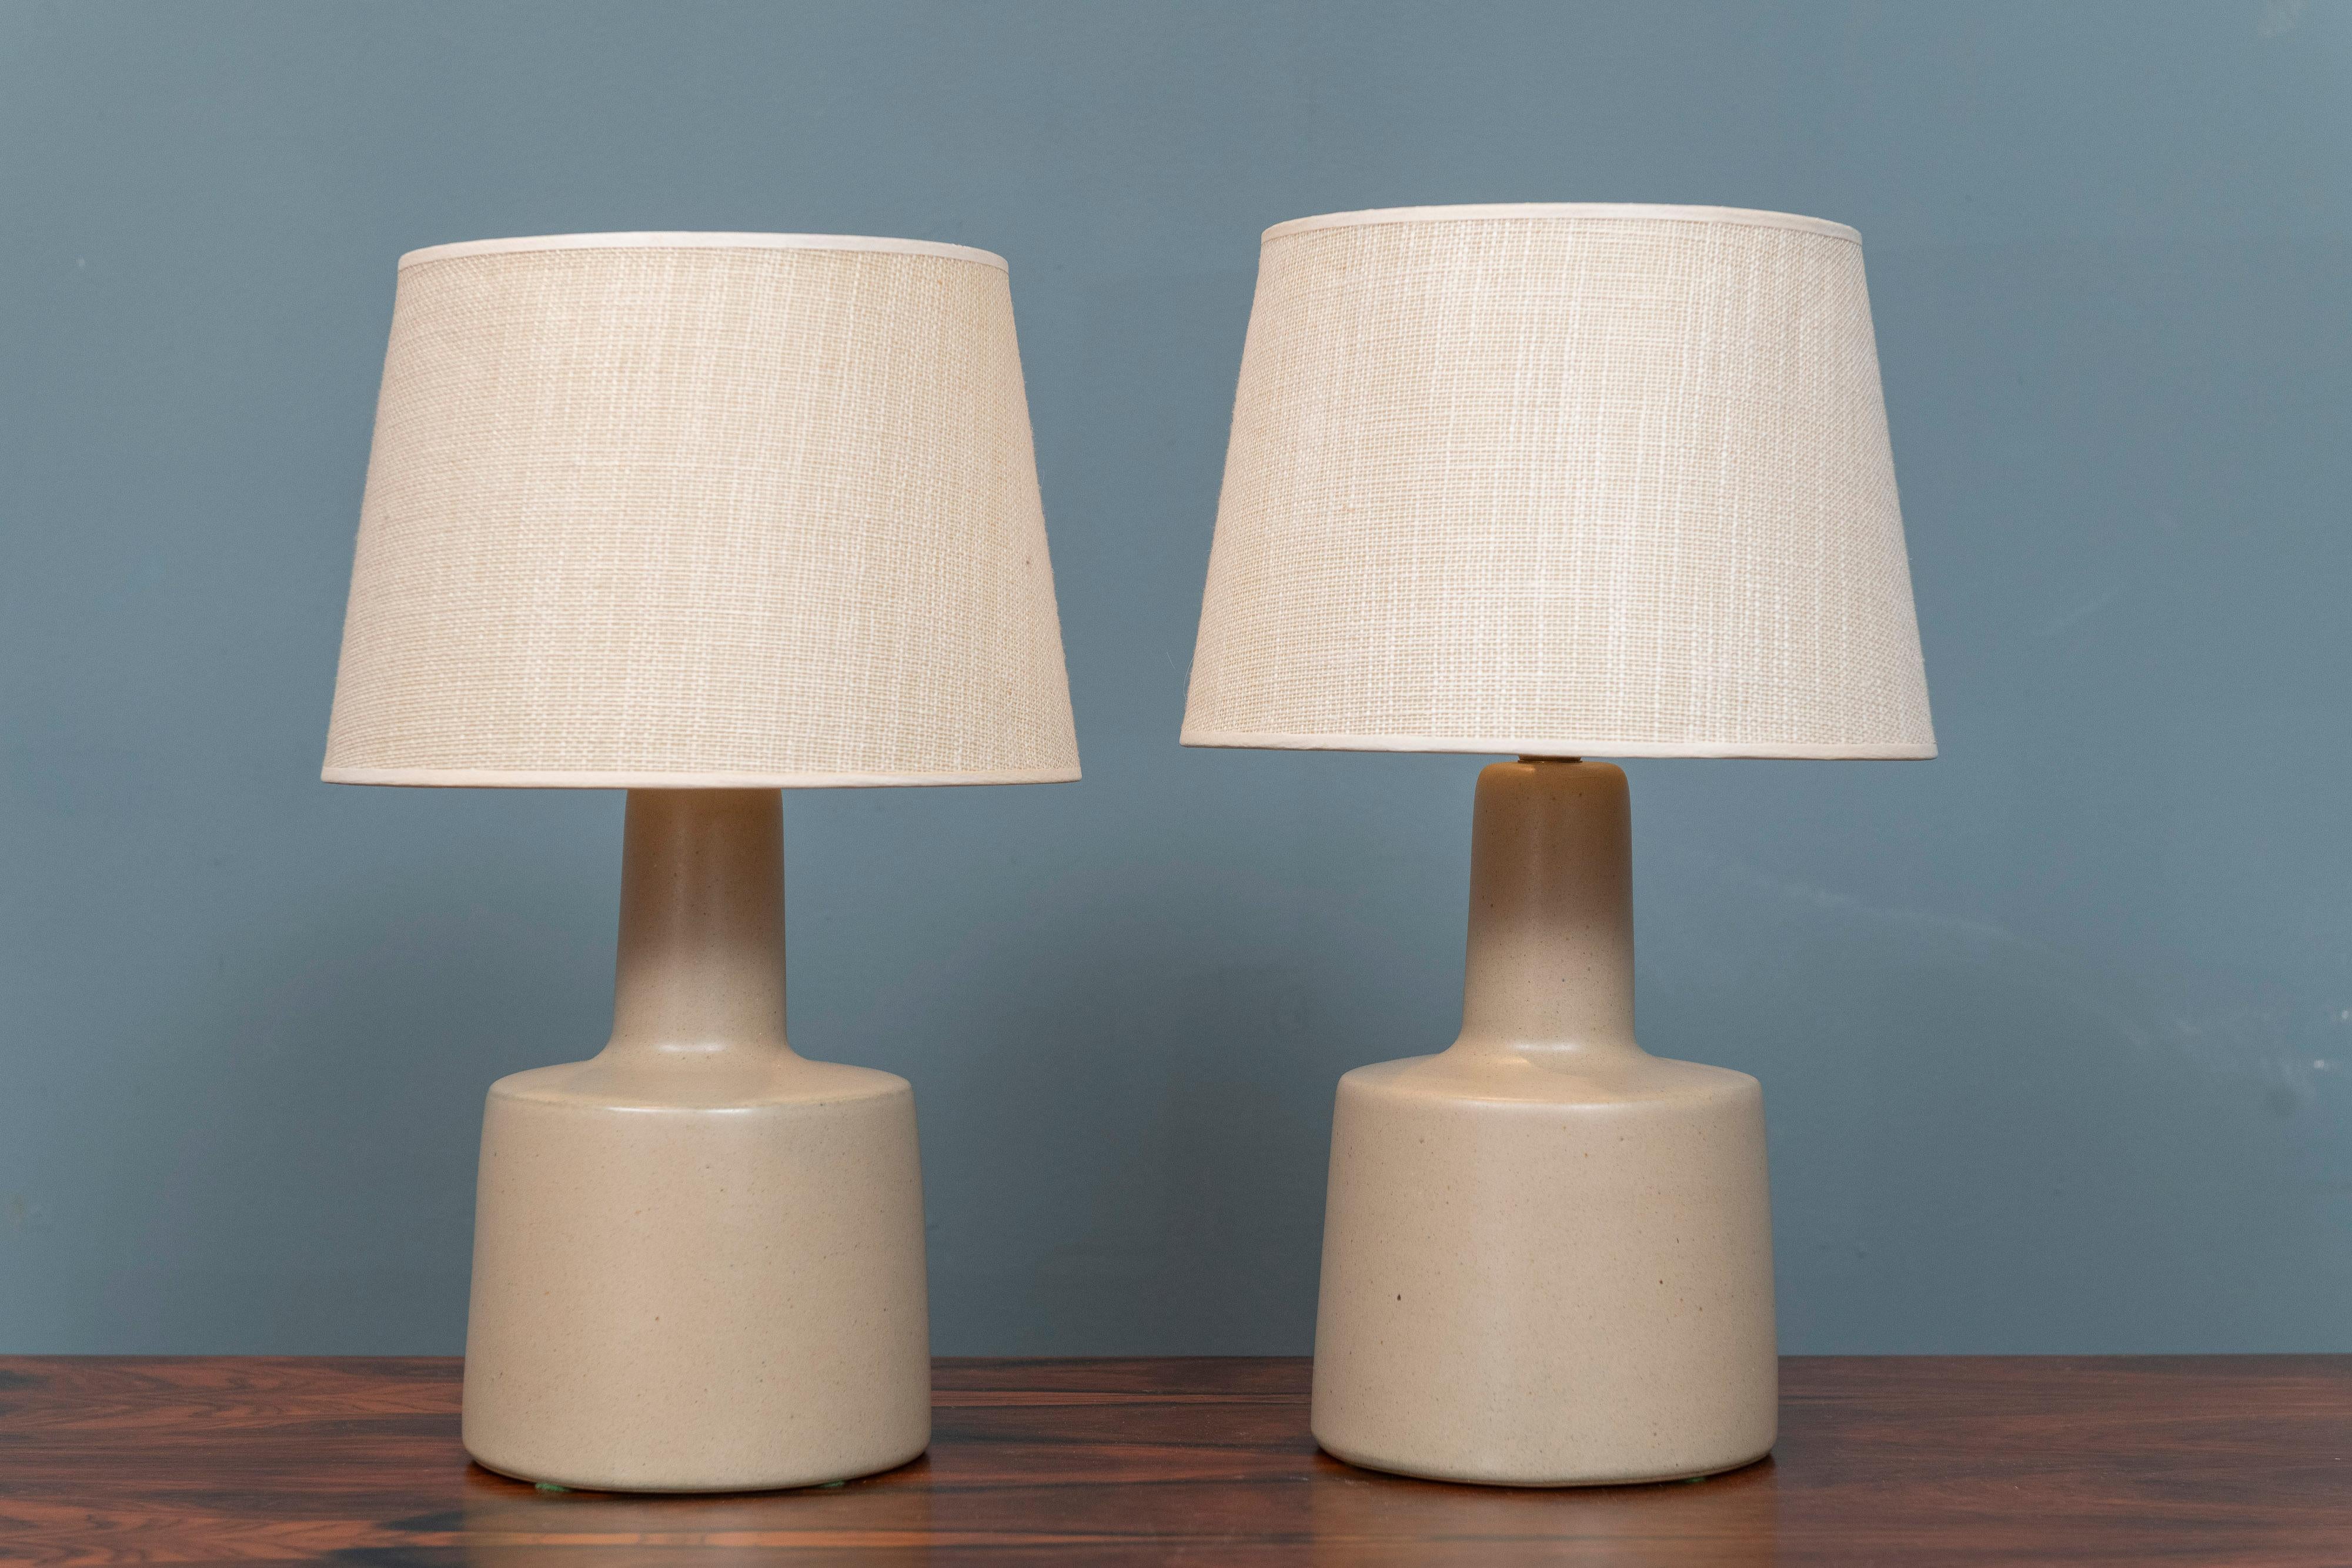 Gordon & Jane Martz design table lamps for Marshall Studios, U.S.A. Simple but modern design ceramic lamp bodies with vintage grass cloth shades that show age and wear but still present well. A sandy cocoa color that is smooth in texture and both